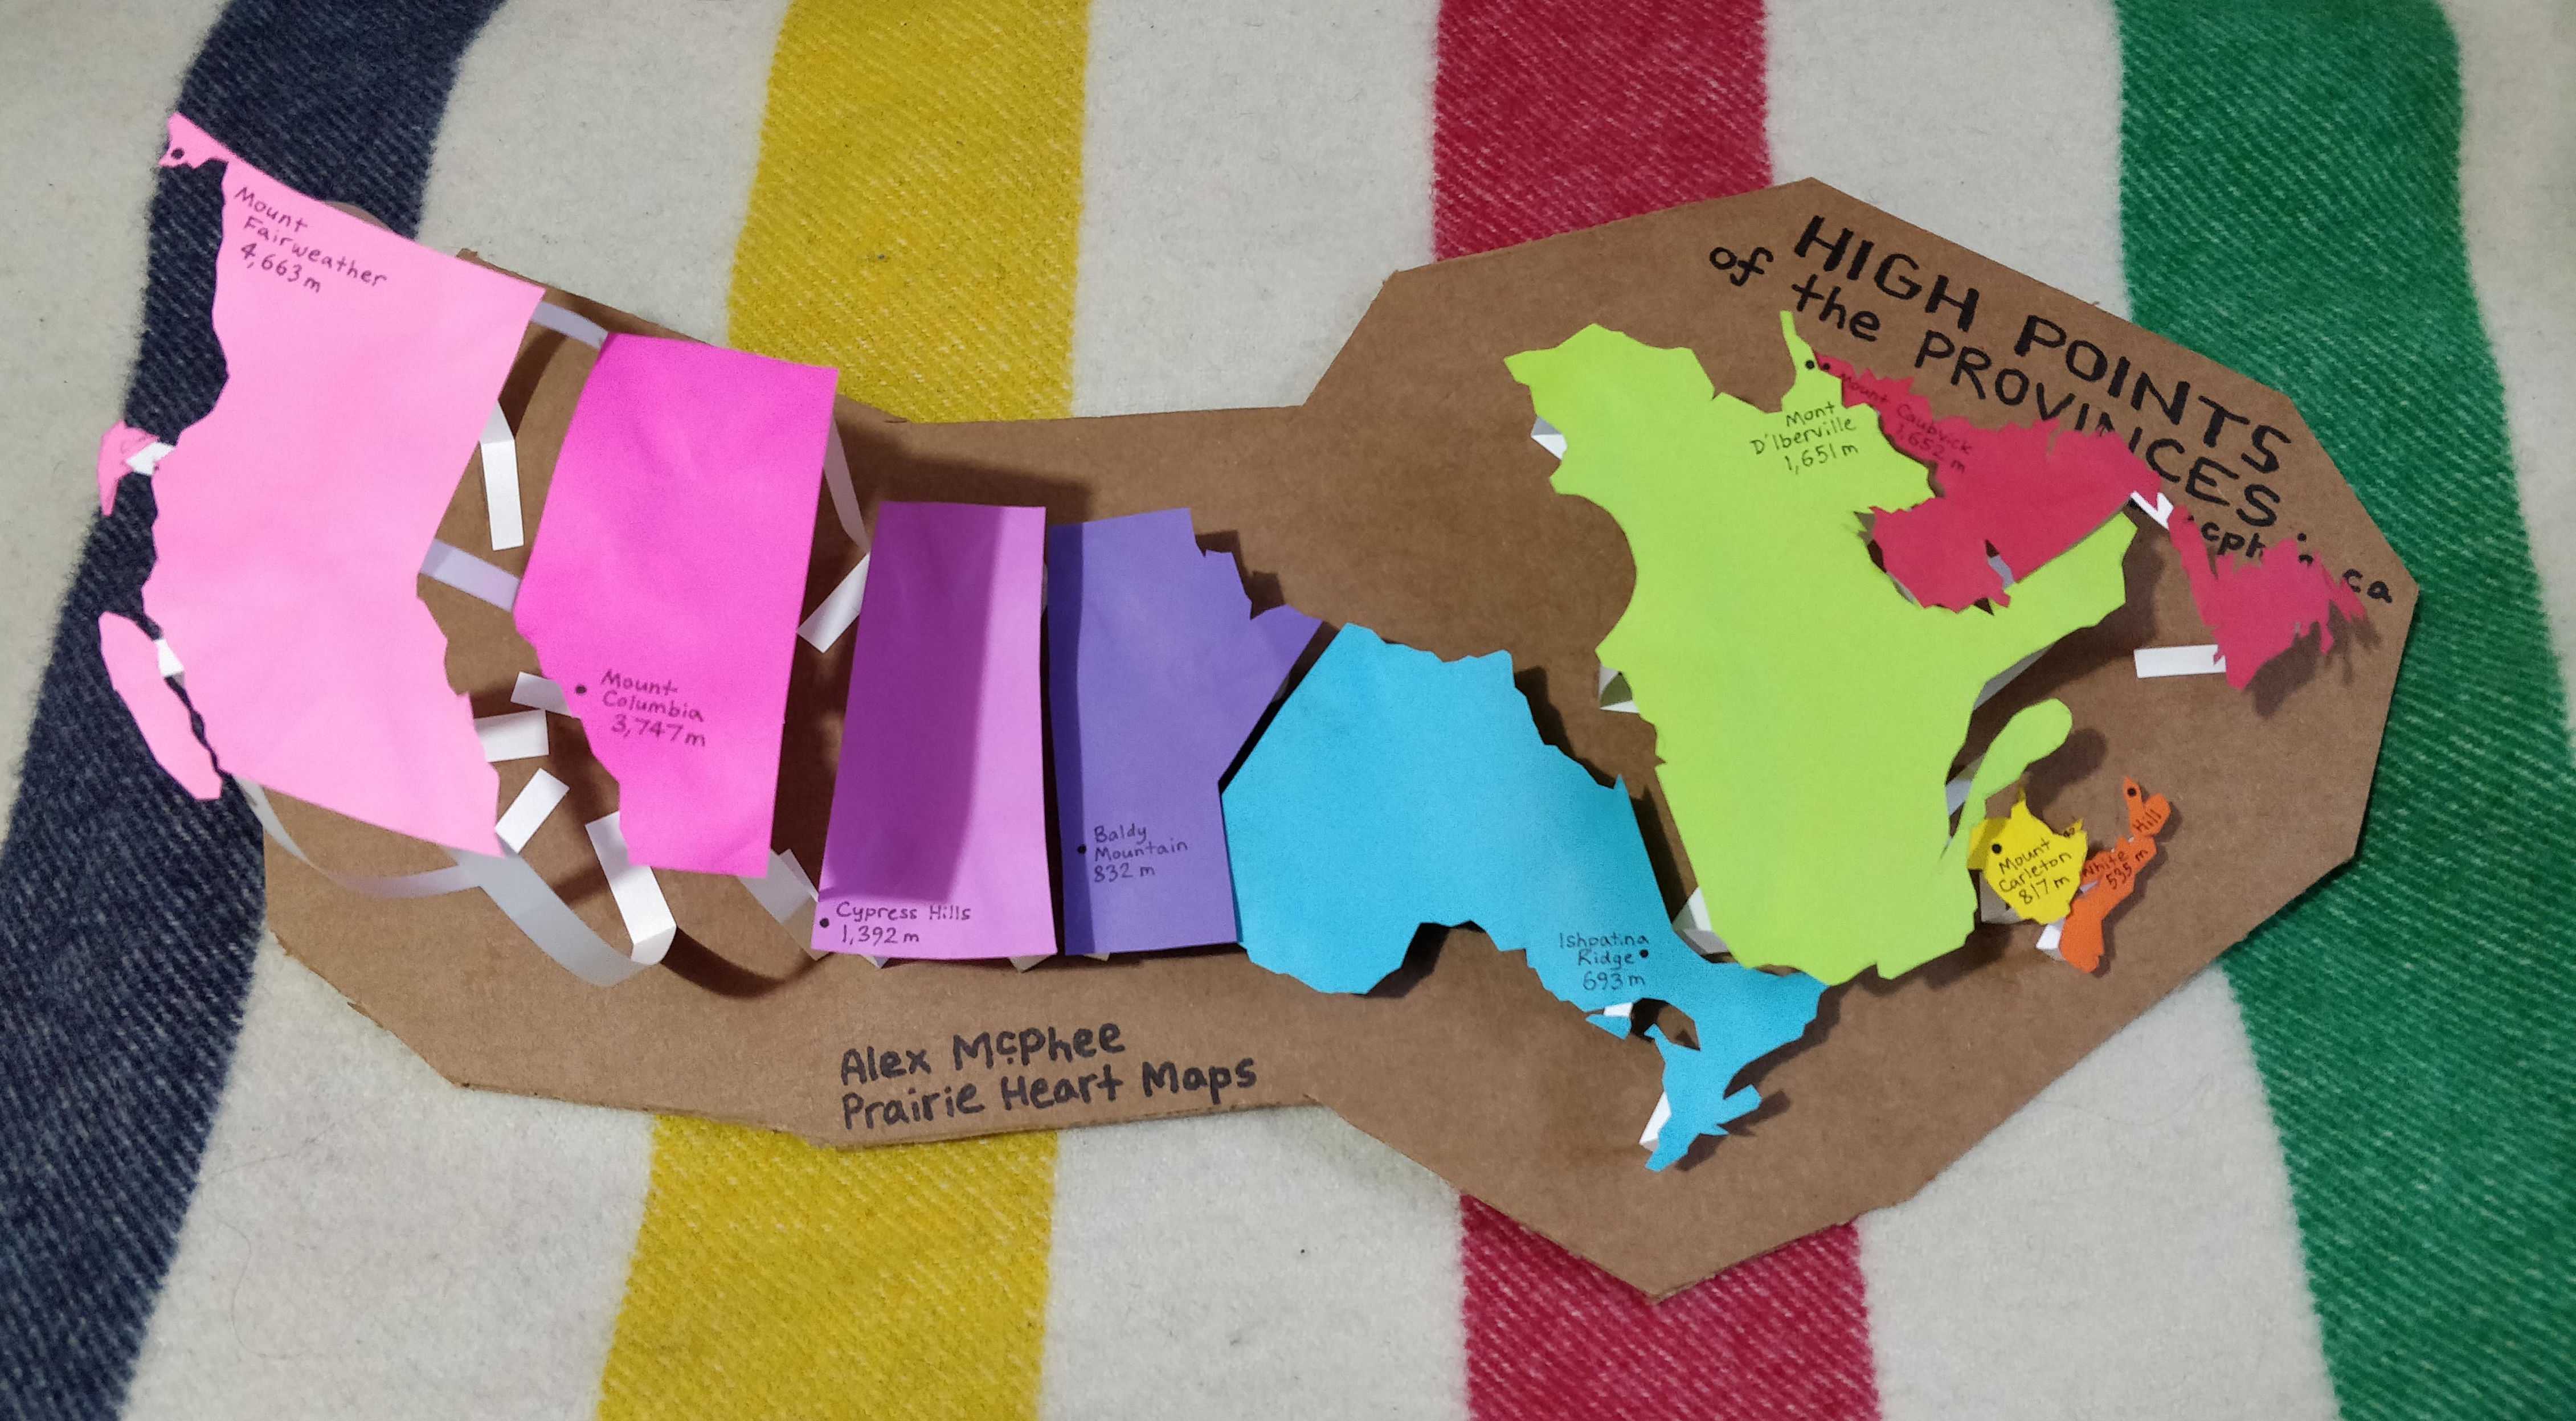 A handmade paper map of the highest point in every province.